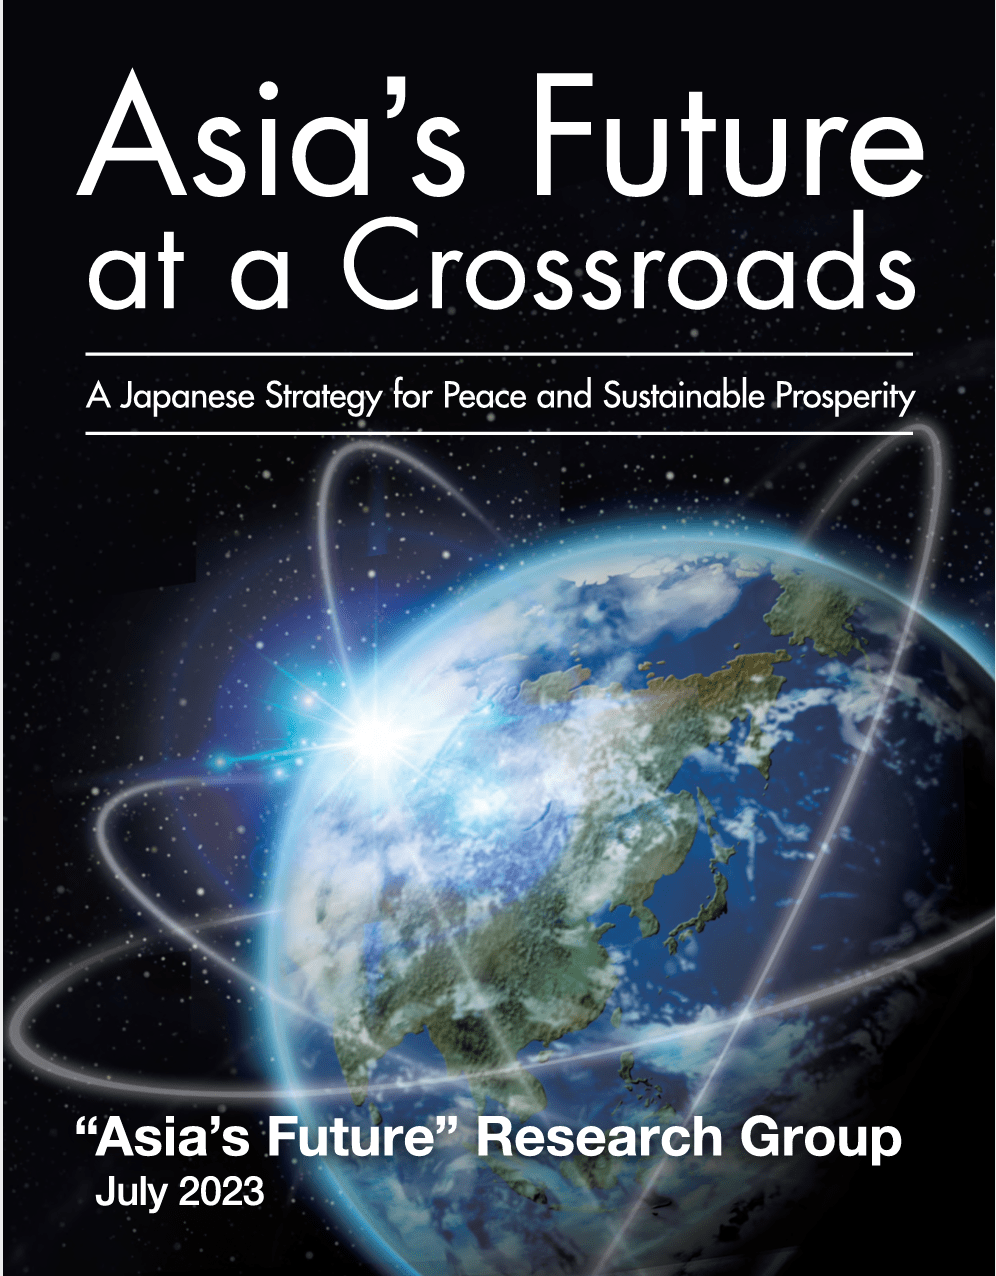 A picture of the world that says "Asia's Future at a Crossroads"